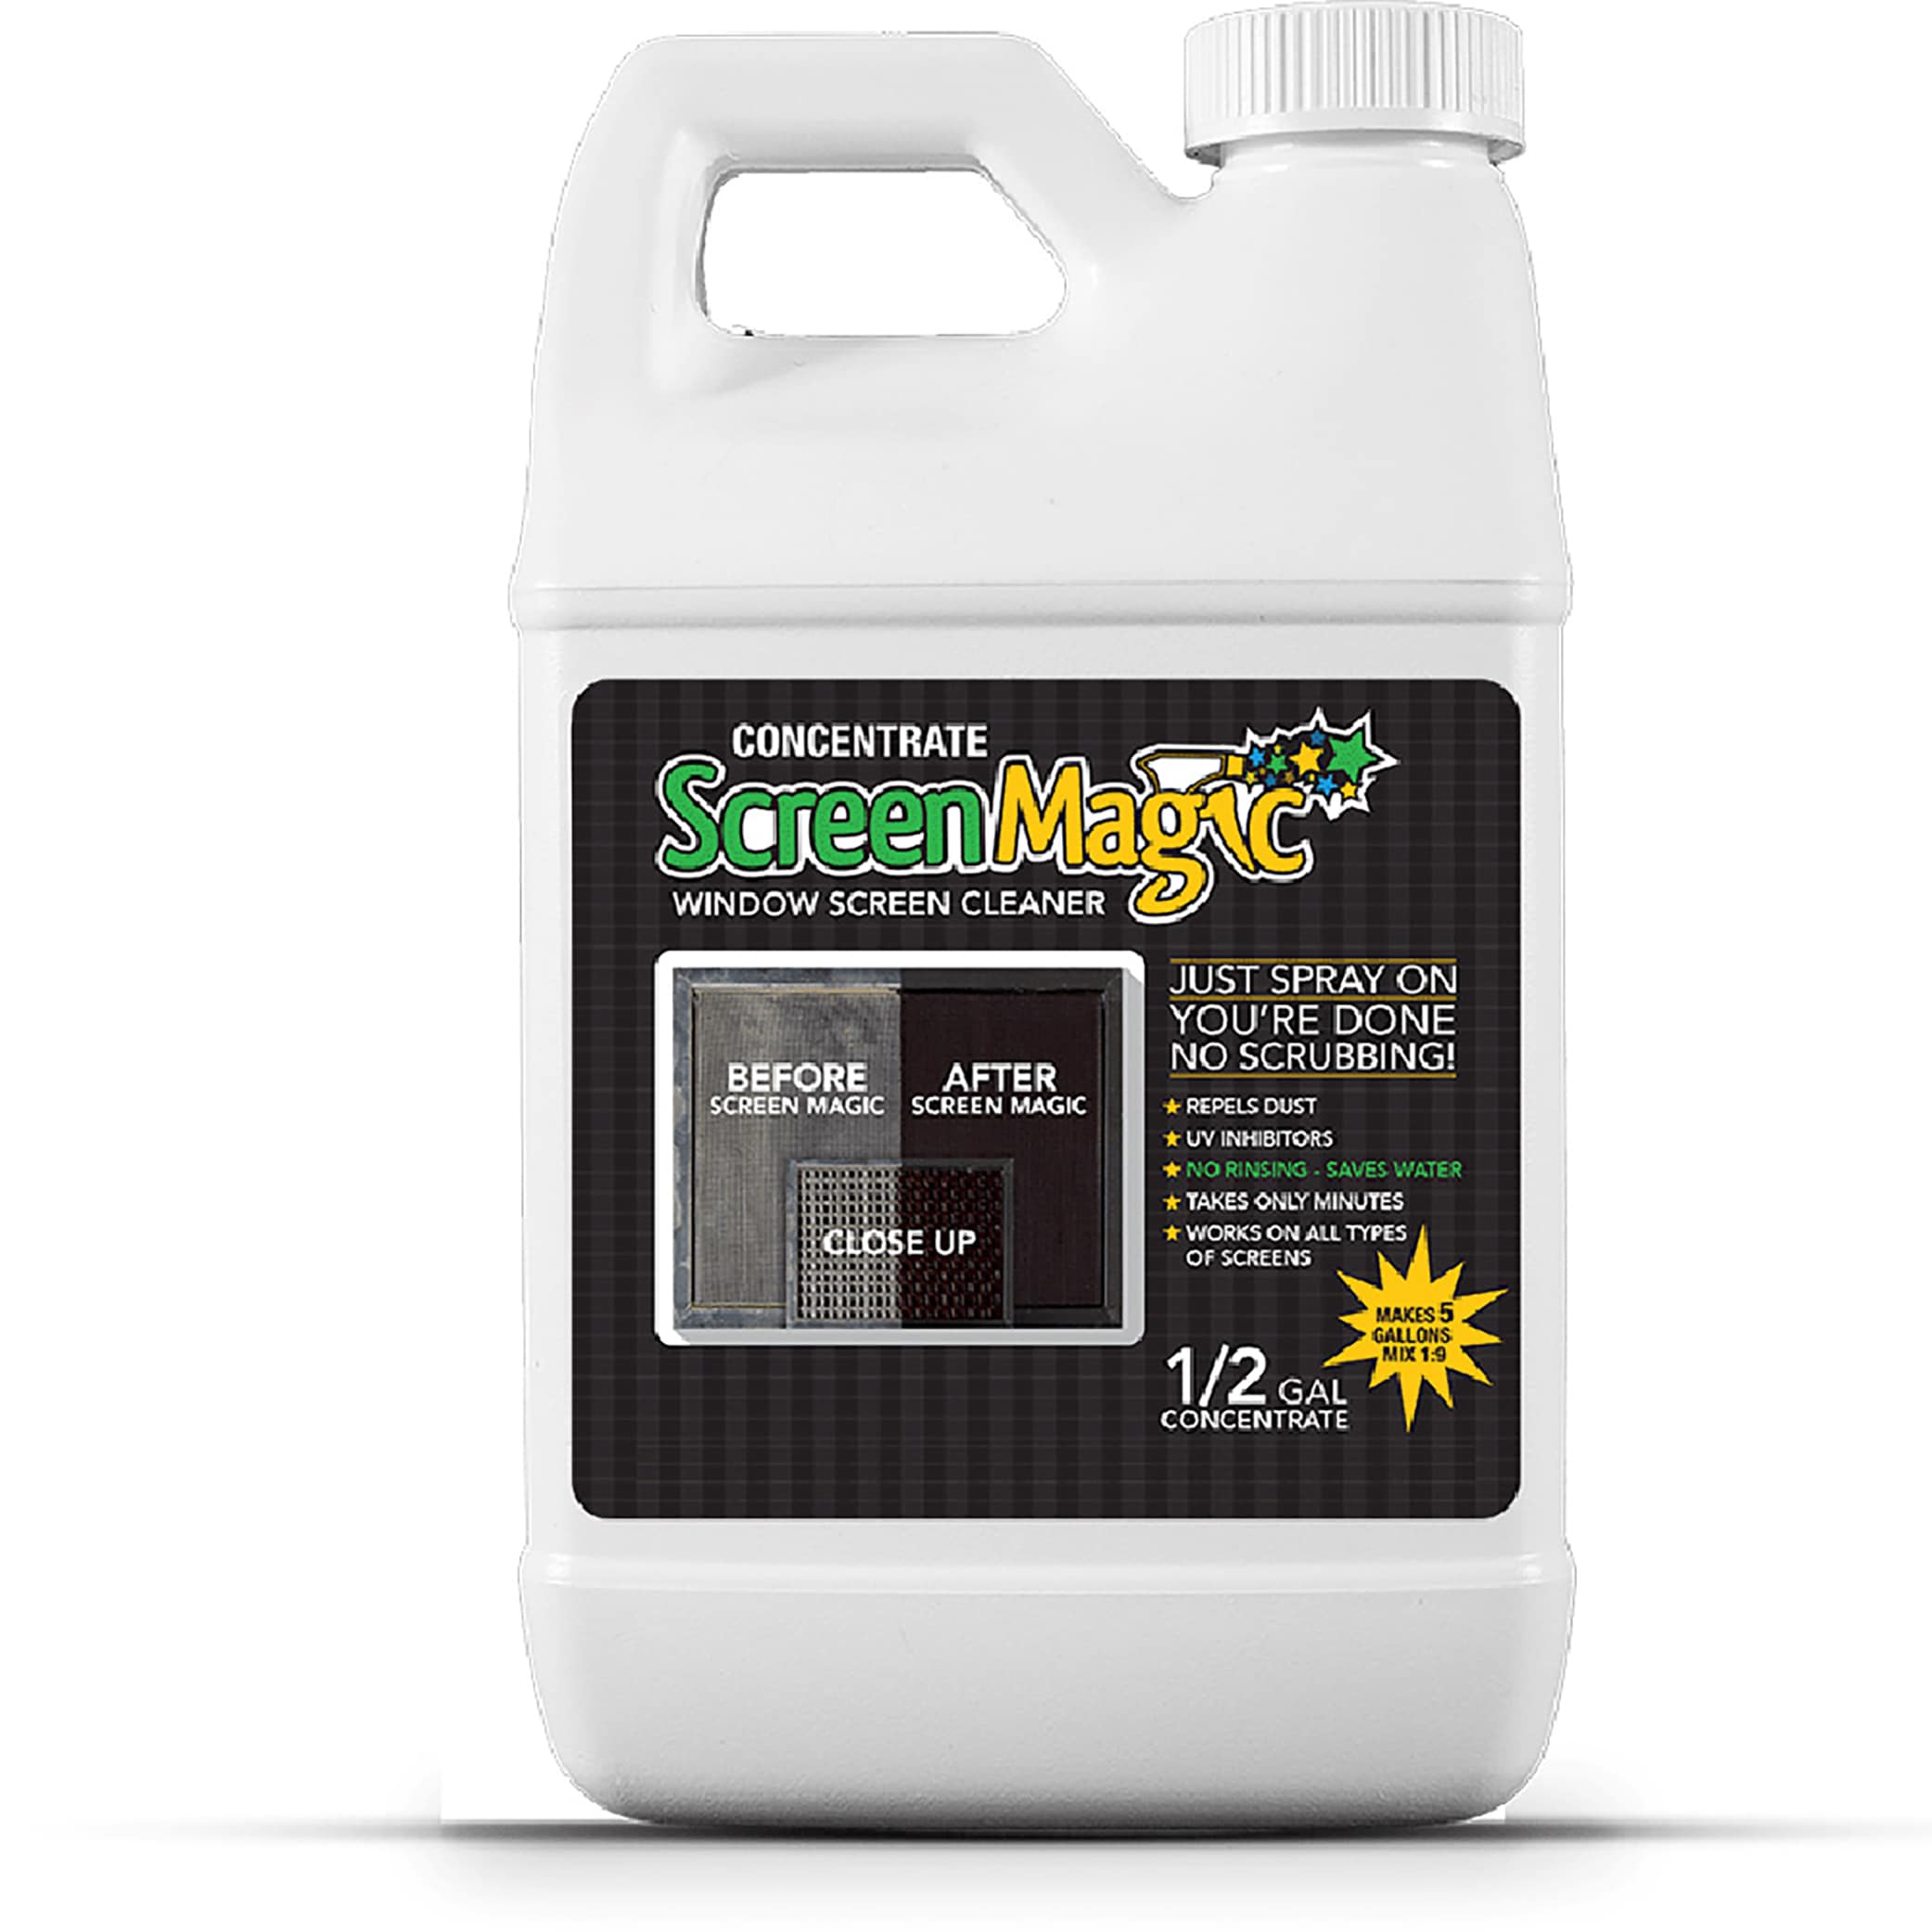 Poly-T Spray: 5 gallon concentrate (makes 40 gallons of spray)